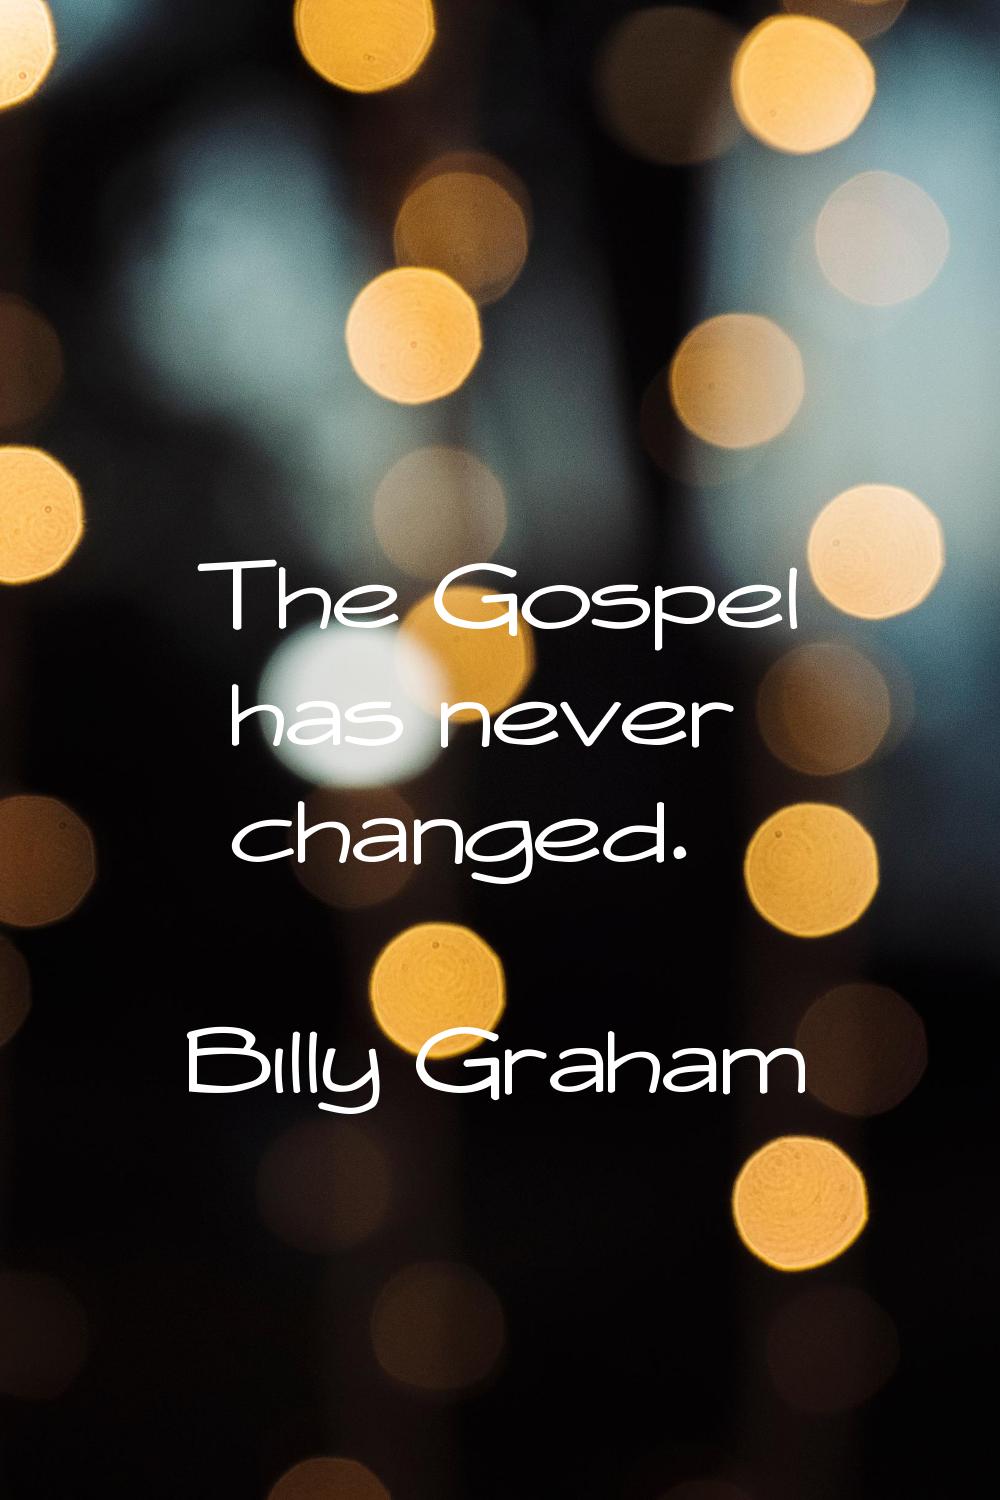 The Gospel has never changed.